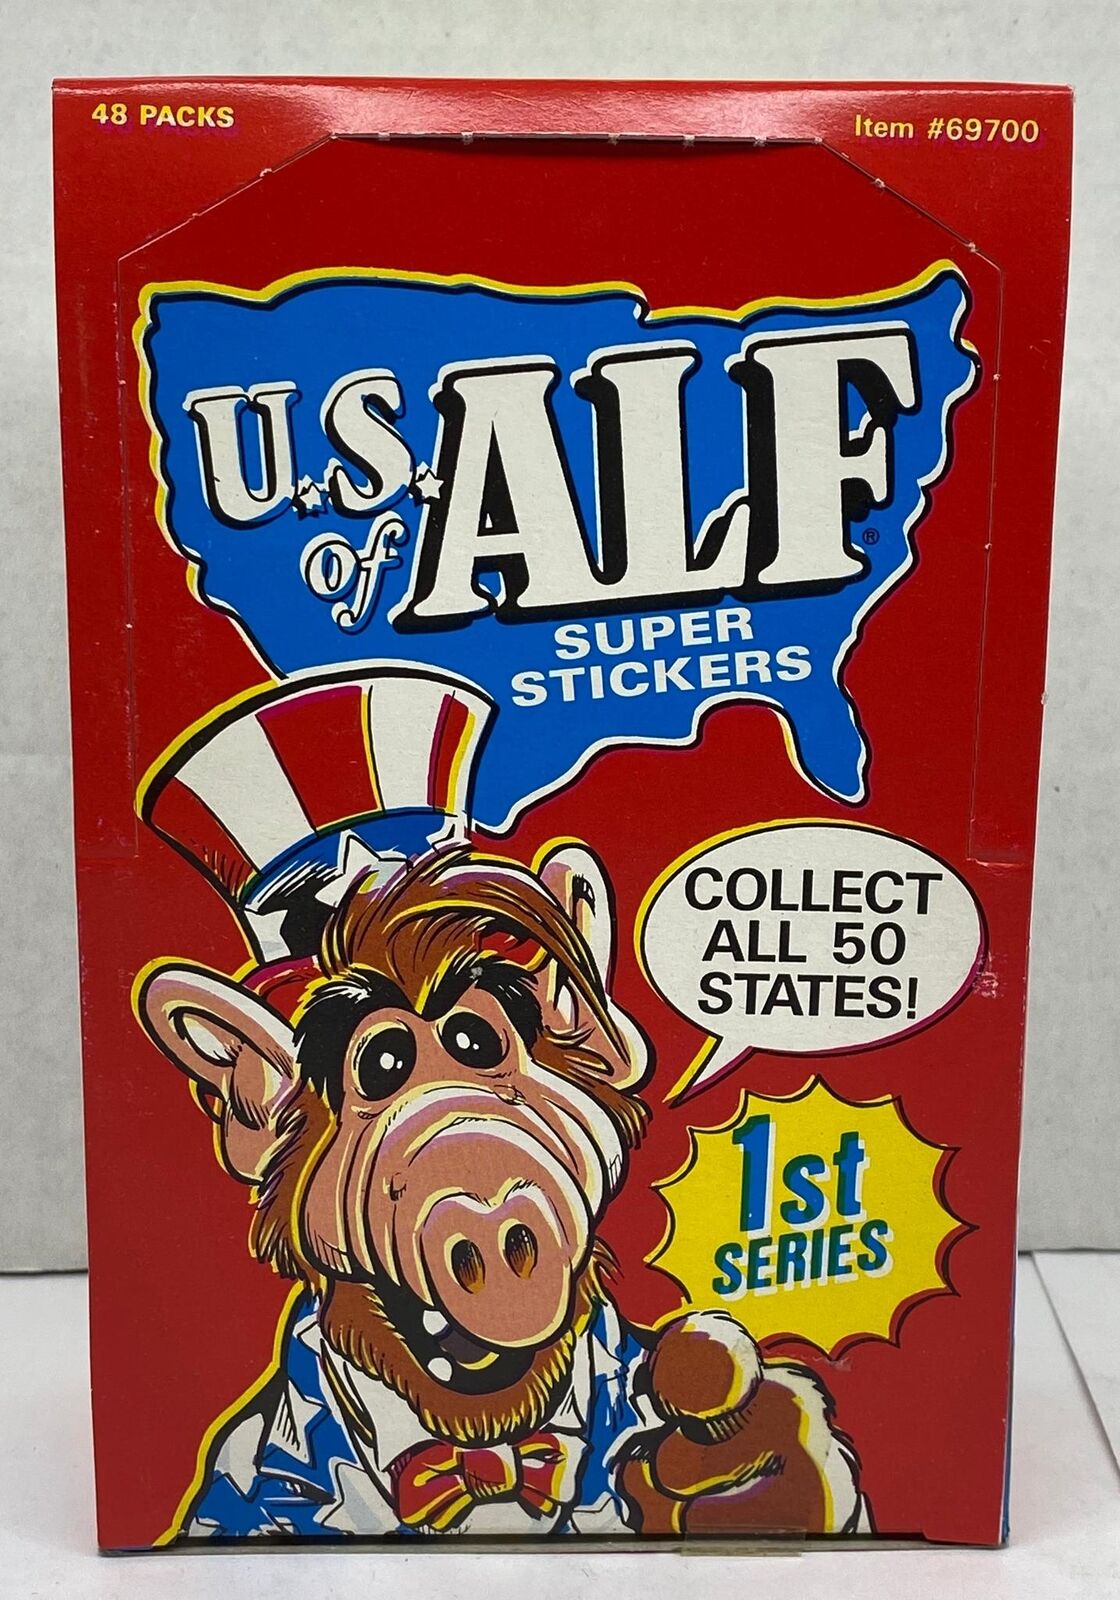 1987 US U.S. of Alf Super Stickers Card Box 1st Series 48 packs Zoot Italy